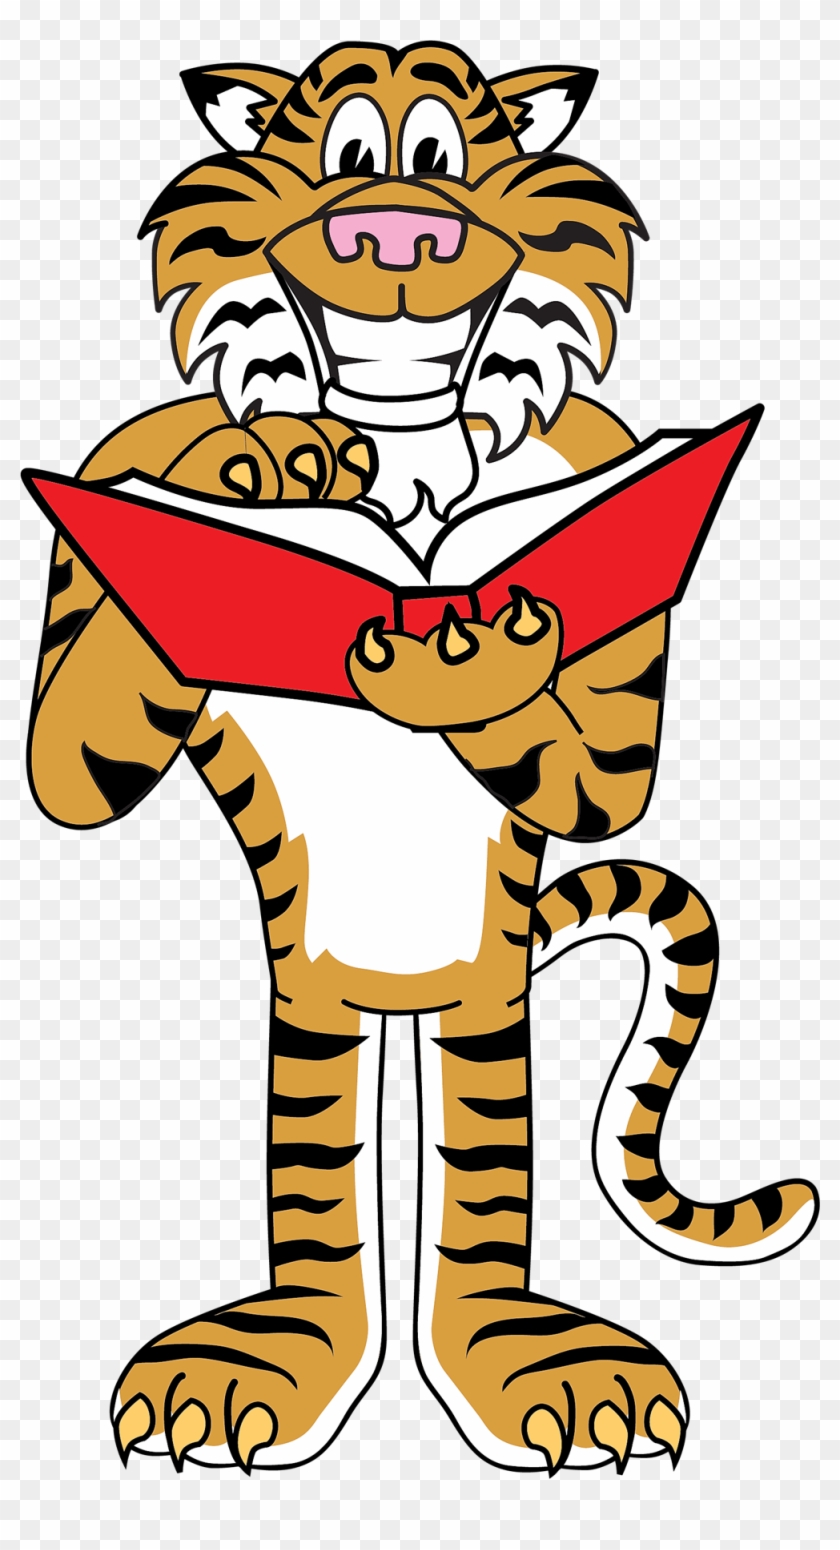 Instructional Time - Cartoon Tiger Standing Up #1664545